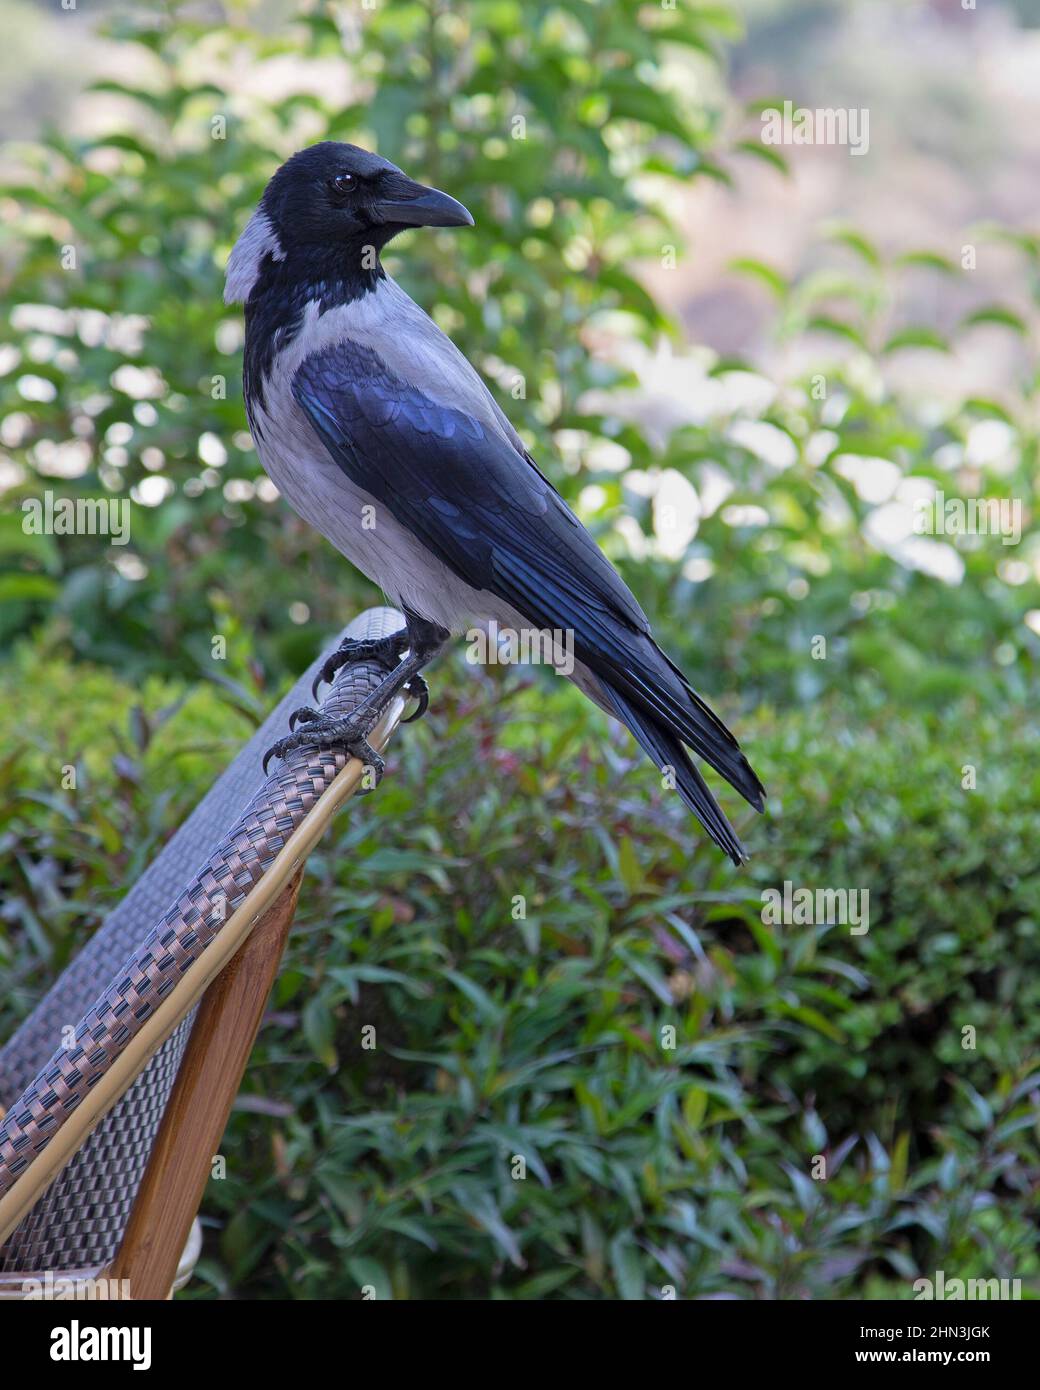 Hooded crow perched on a chair in an outdoor garden in the Yemin Moshe neighborhood of Jerusalem. Corvus cornix Stock Photo